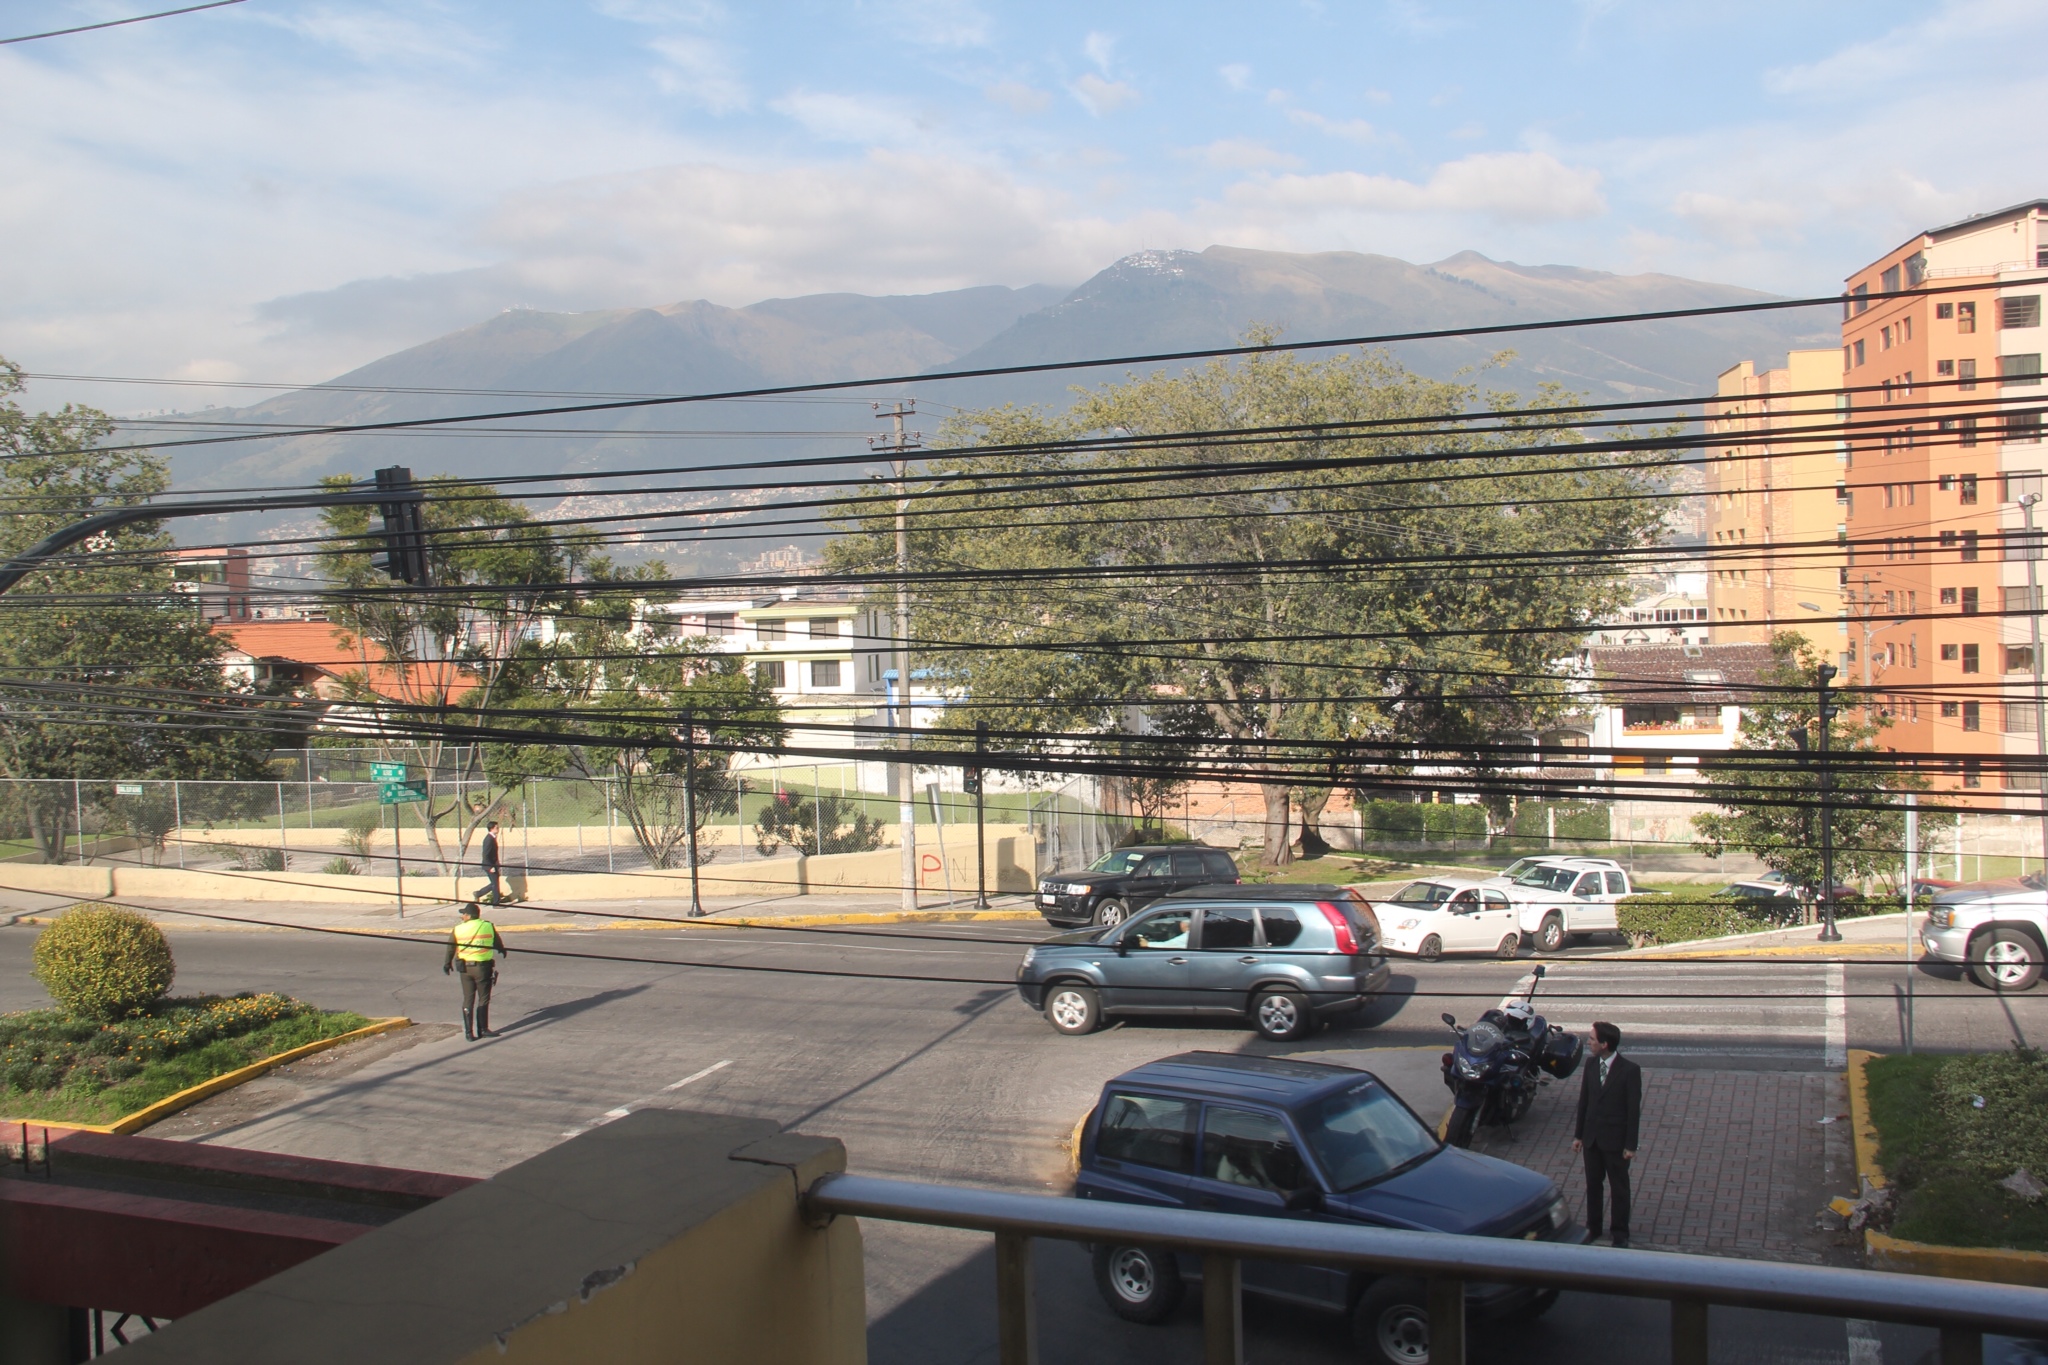 2 Days in Quito – Lost and Found